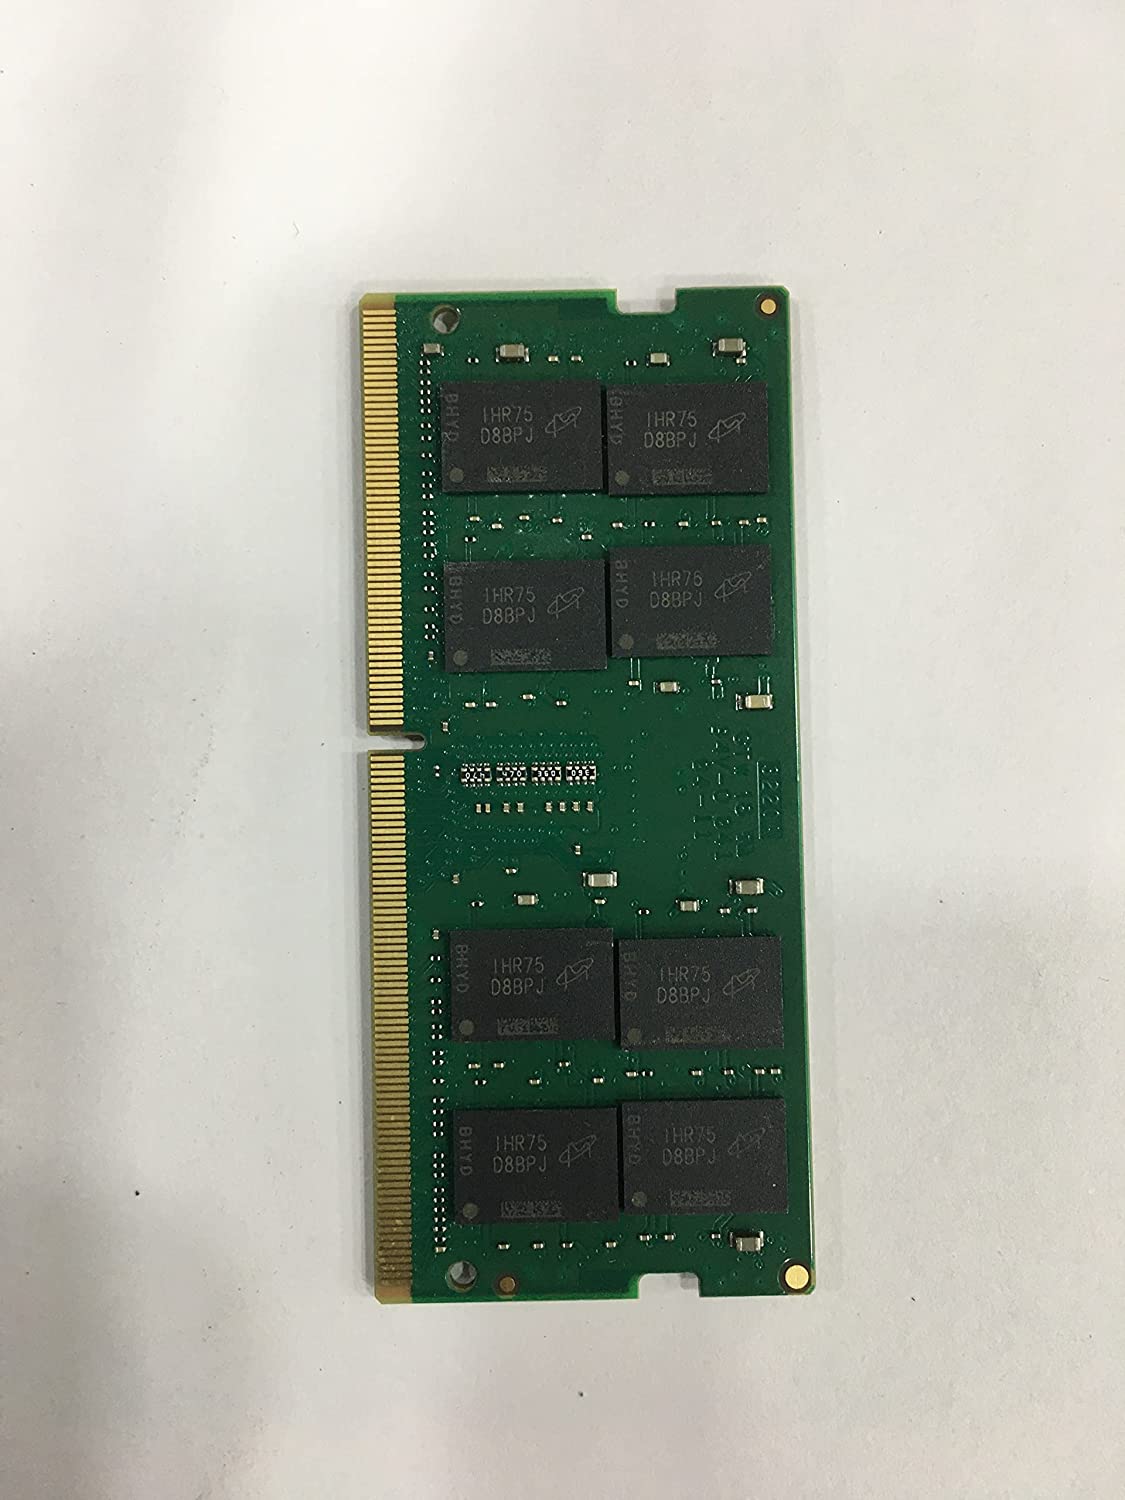 Crucial CT16G4SFRA32A, 16GB DDR4, Best Price, Buy Now!